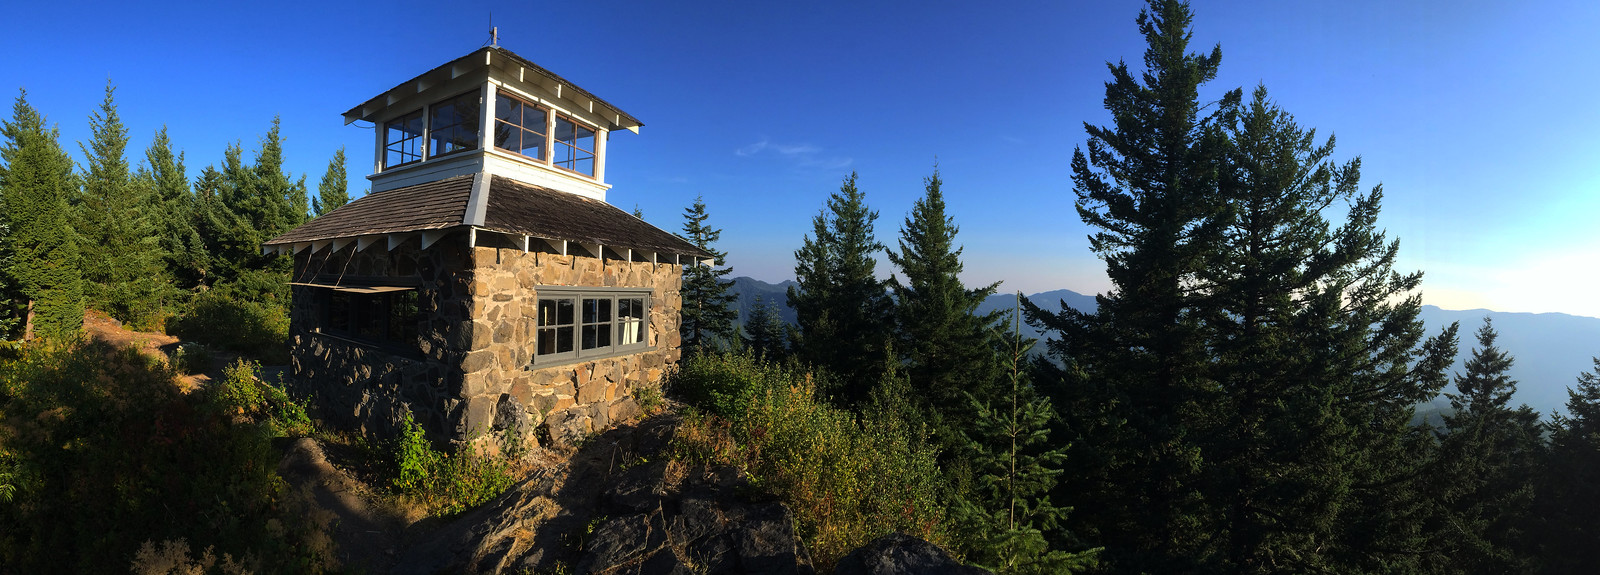 View of Pechuck Lookout and the Cascade Mountains.